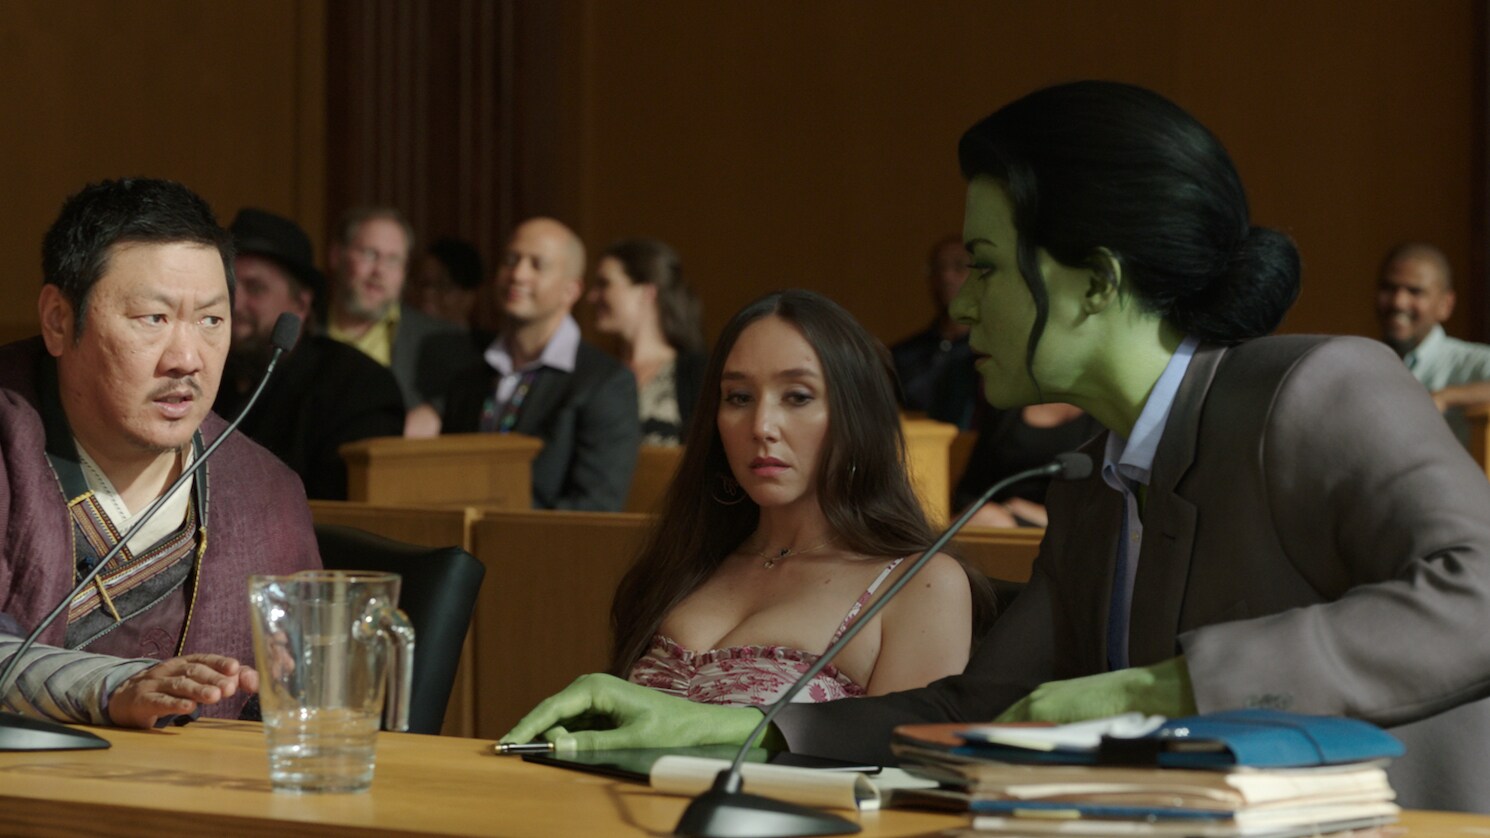 (L-R): Benedict Wong as Wong, Patty Guggenheim as Madisynn, and Tatiana Maslany as Jennifer "Jen" Walters/She-Hulk in Marvel Studios' She-Hulk: Attorney at Law, exclusively on Disney+. Photo courtesy of Marvel Studios. © 2022 MARVEL.